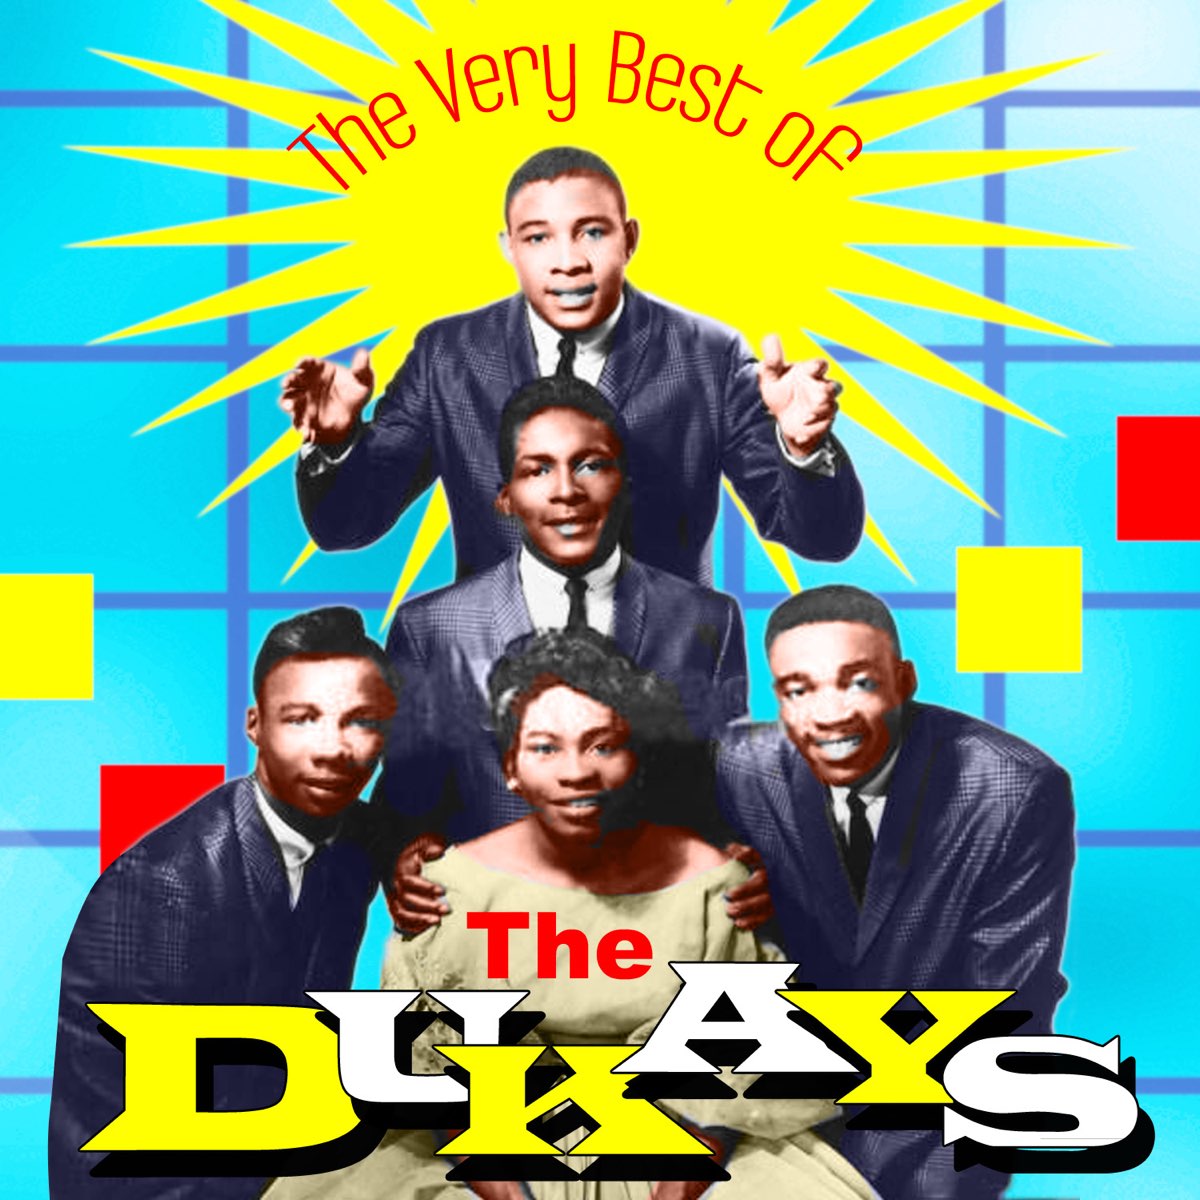 The Very Best Of - Album by The Dukays - Apple Music